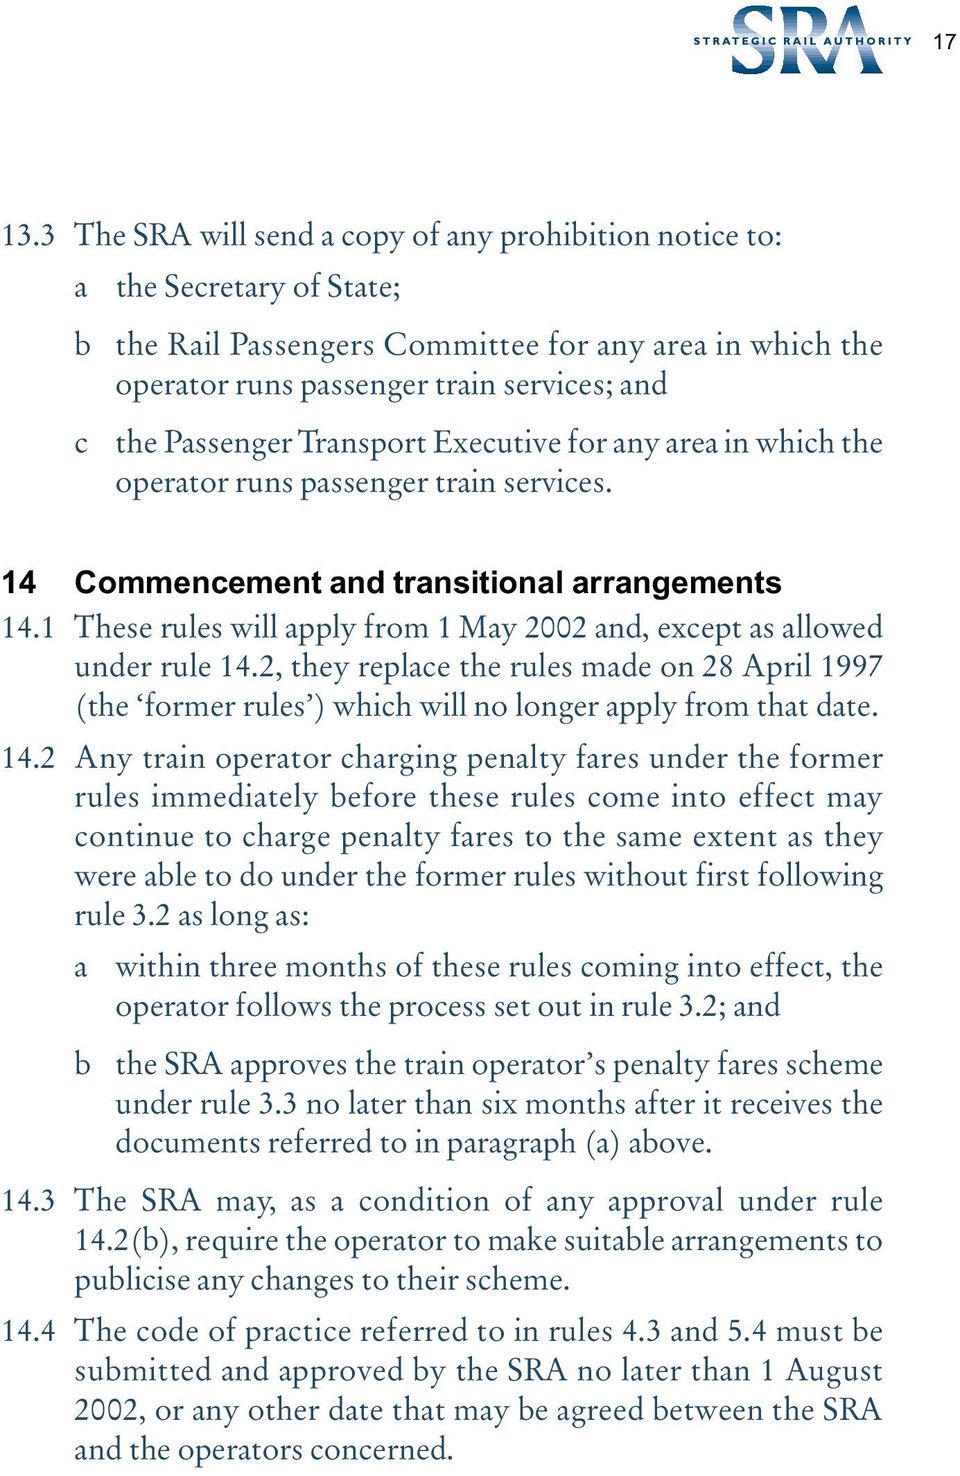 Passenger Transport Executive for any area in which the operator runs passenger train services. 14 Commencement and transitional arrangements 14.